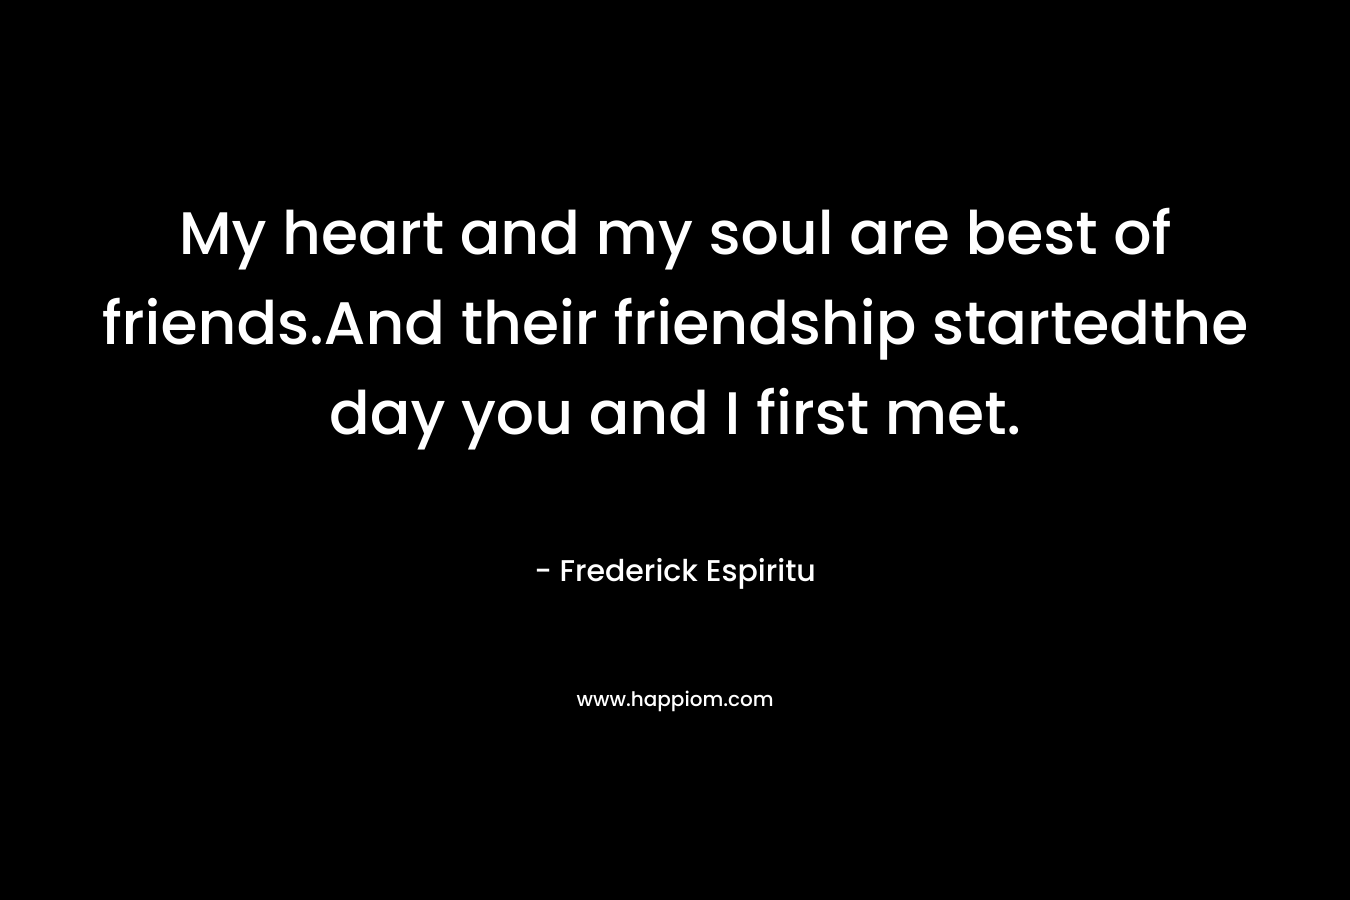 My heart and my soul are best of friends.And their friendship startedthe day you and I first met. – Frederick Espiritu